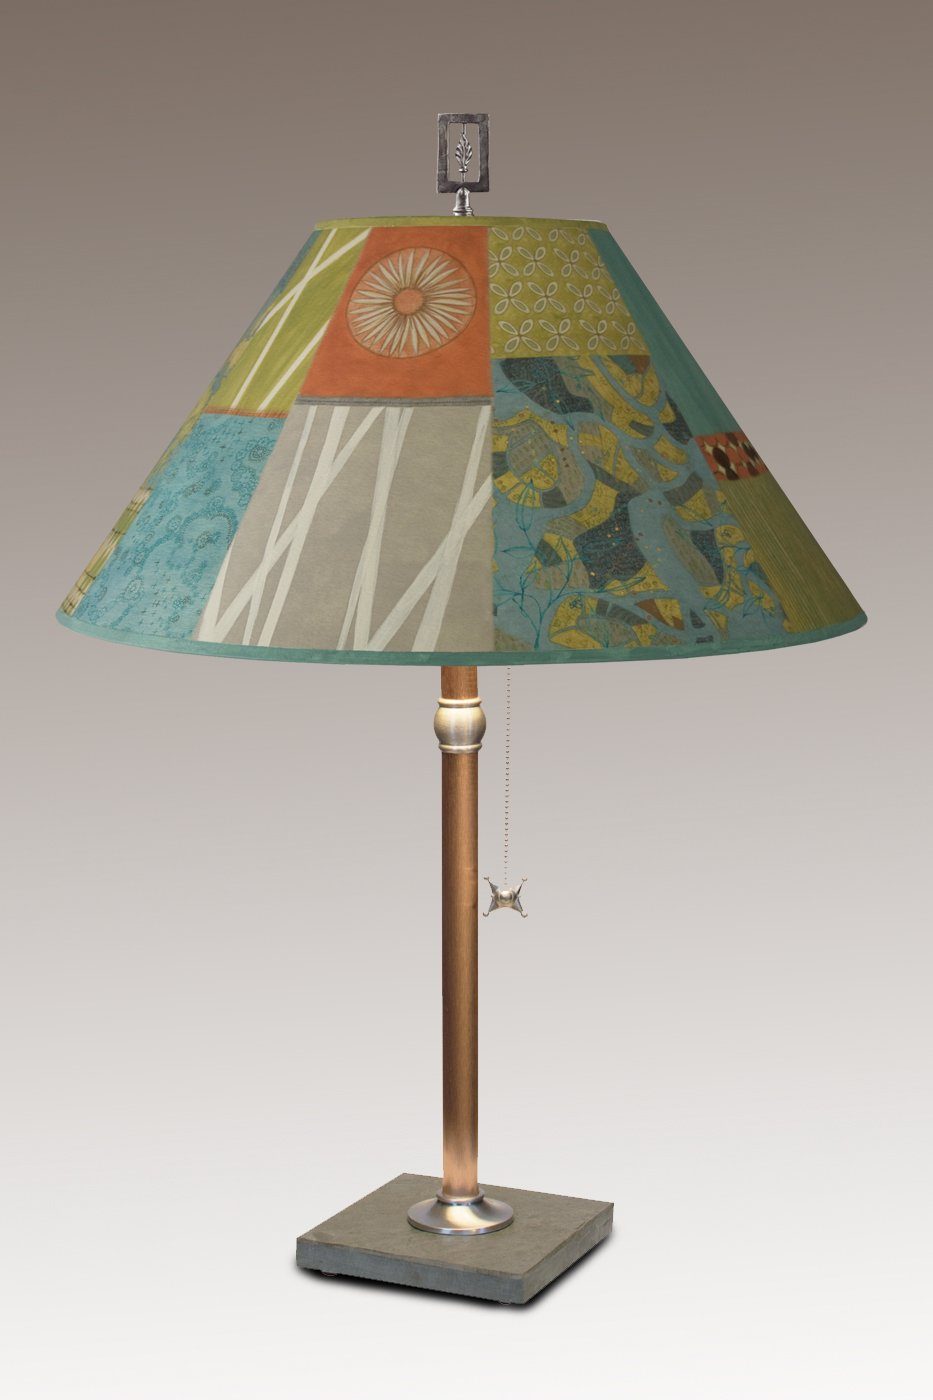 Copper Table Lamp with Large Conical Shade in Zest